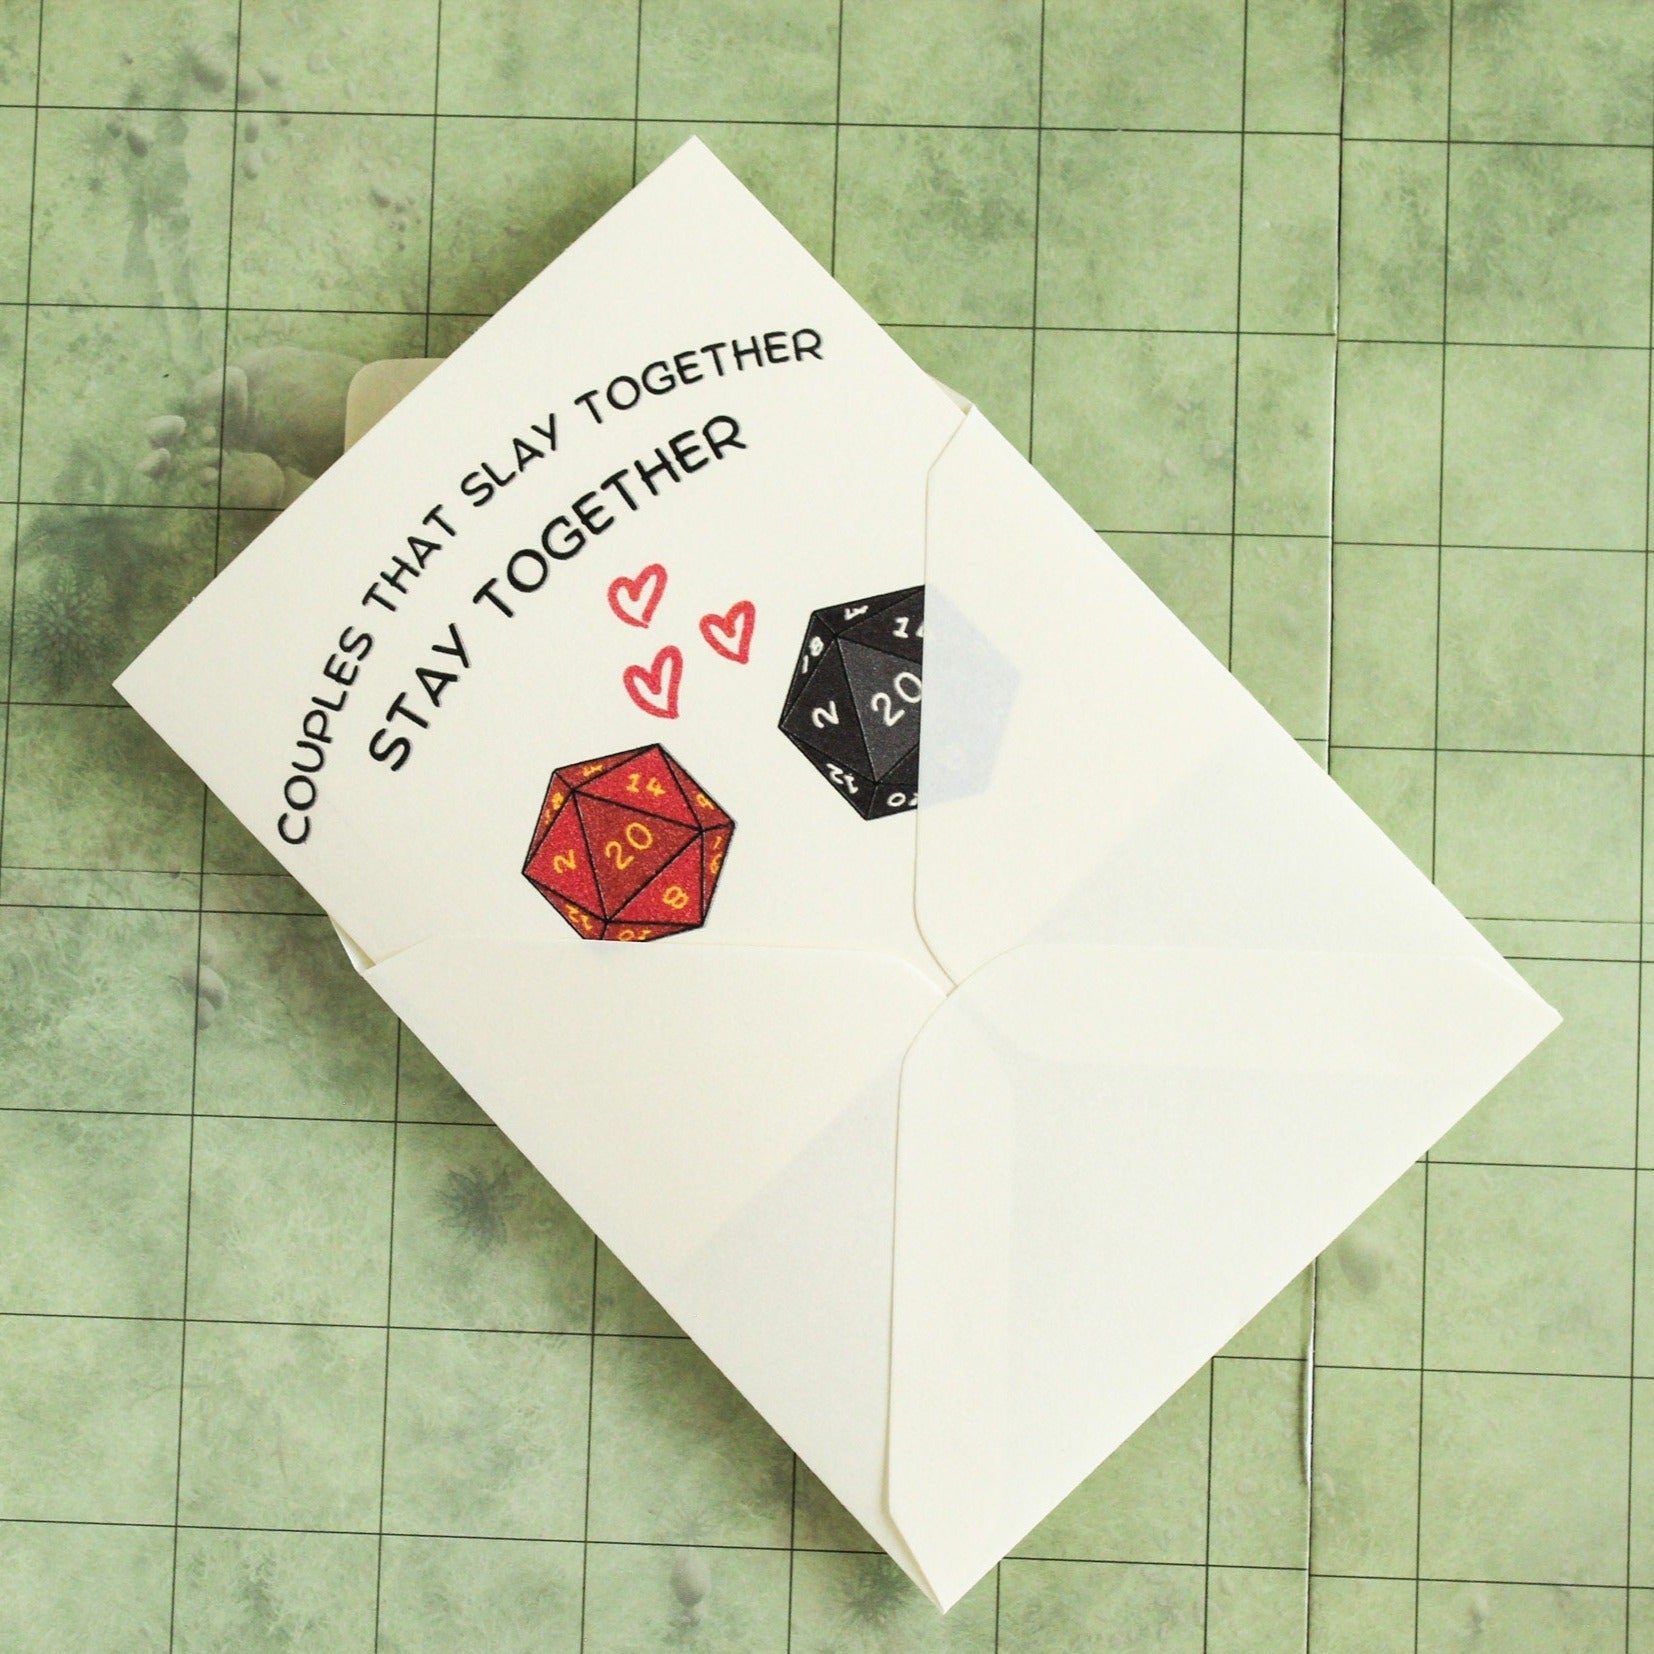 DnD Couples That Slay Together Stay Together Romance Love Card | Dungeons and Dragons Card | DnD Card | DnD Present | DnD Love | DnD Gift